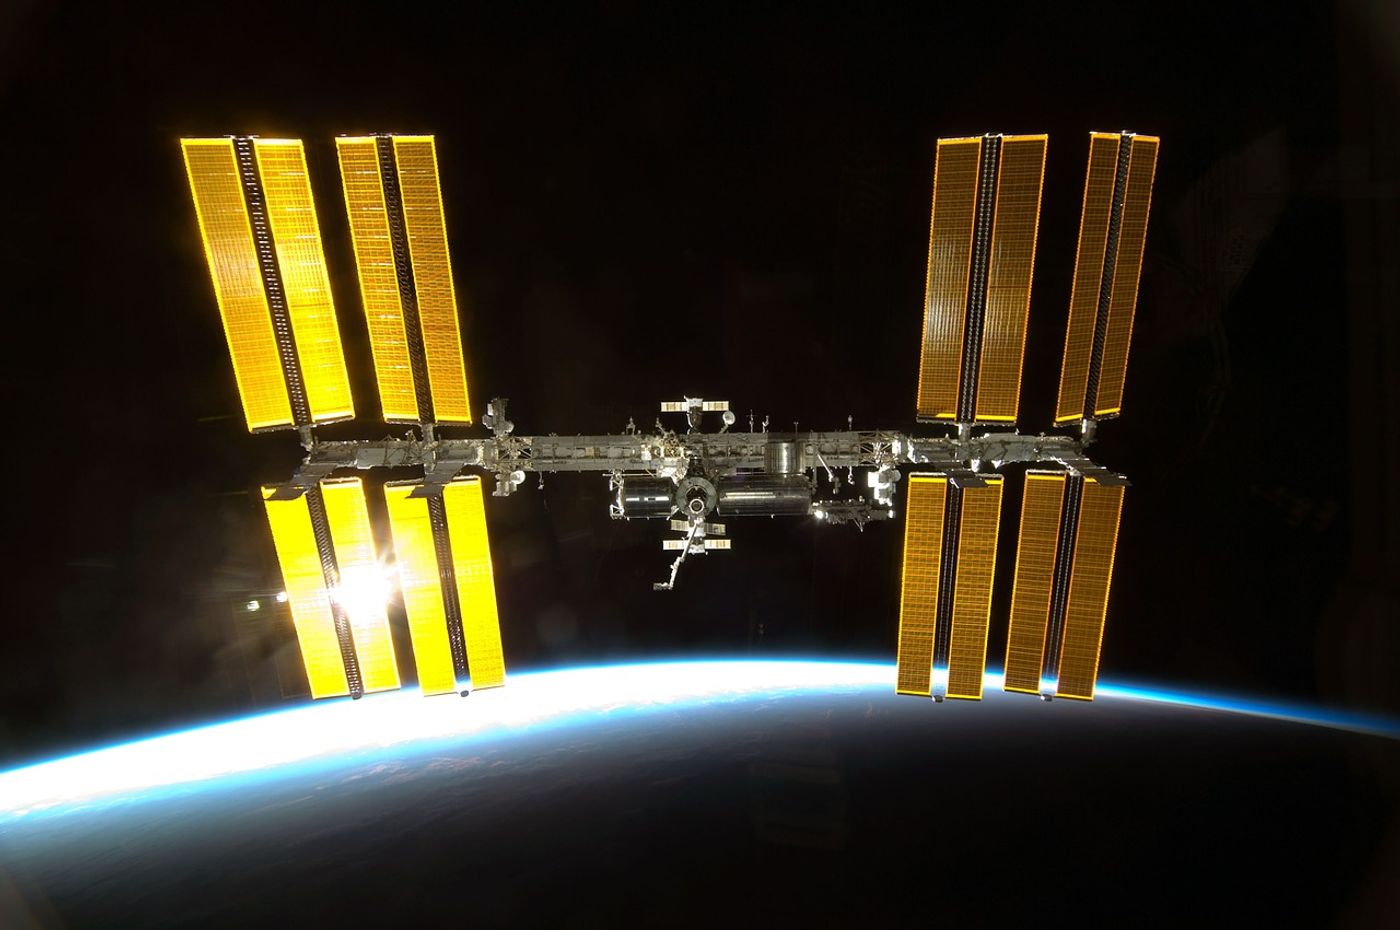 The International Space Station has been bustling with capsule visits and new experiments to deploy.